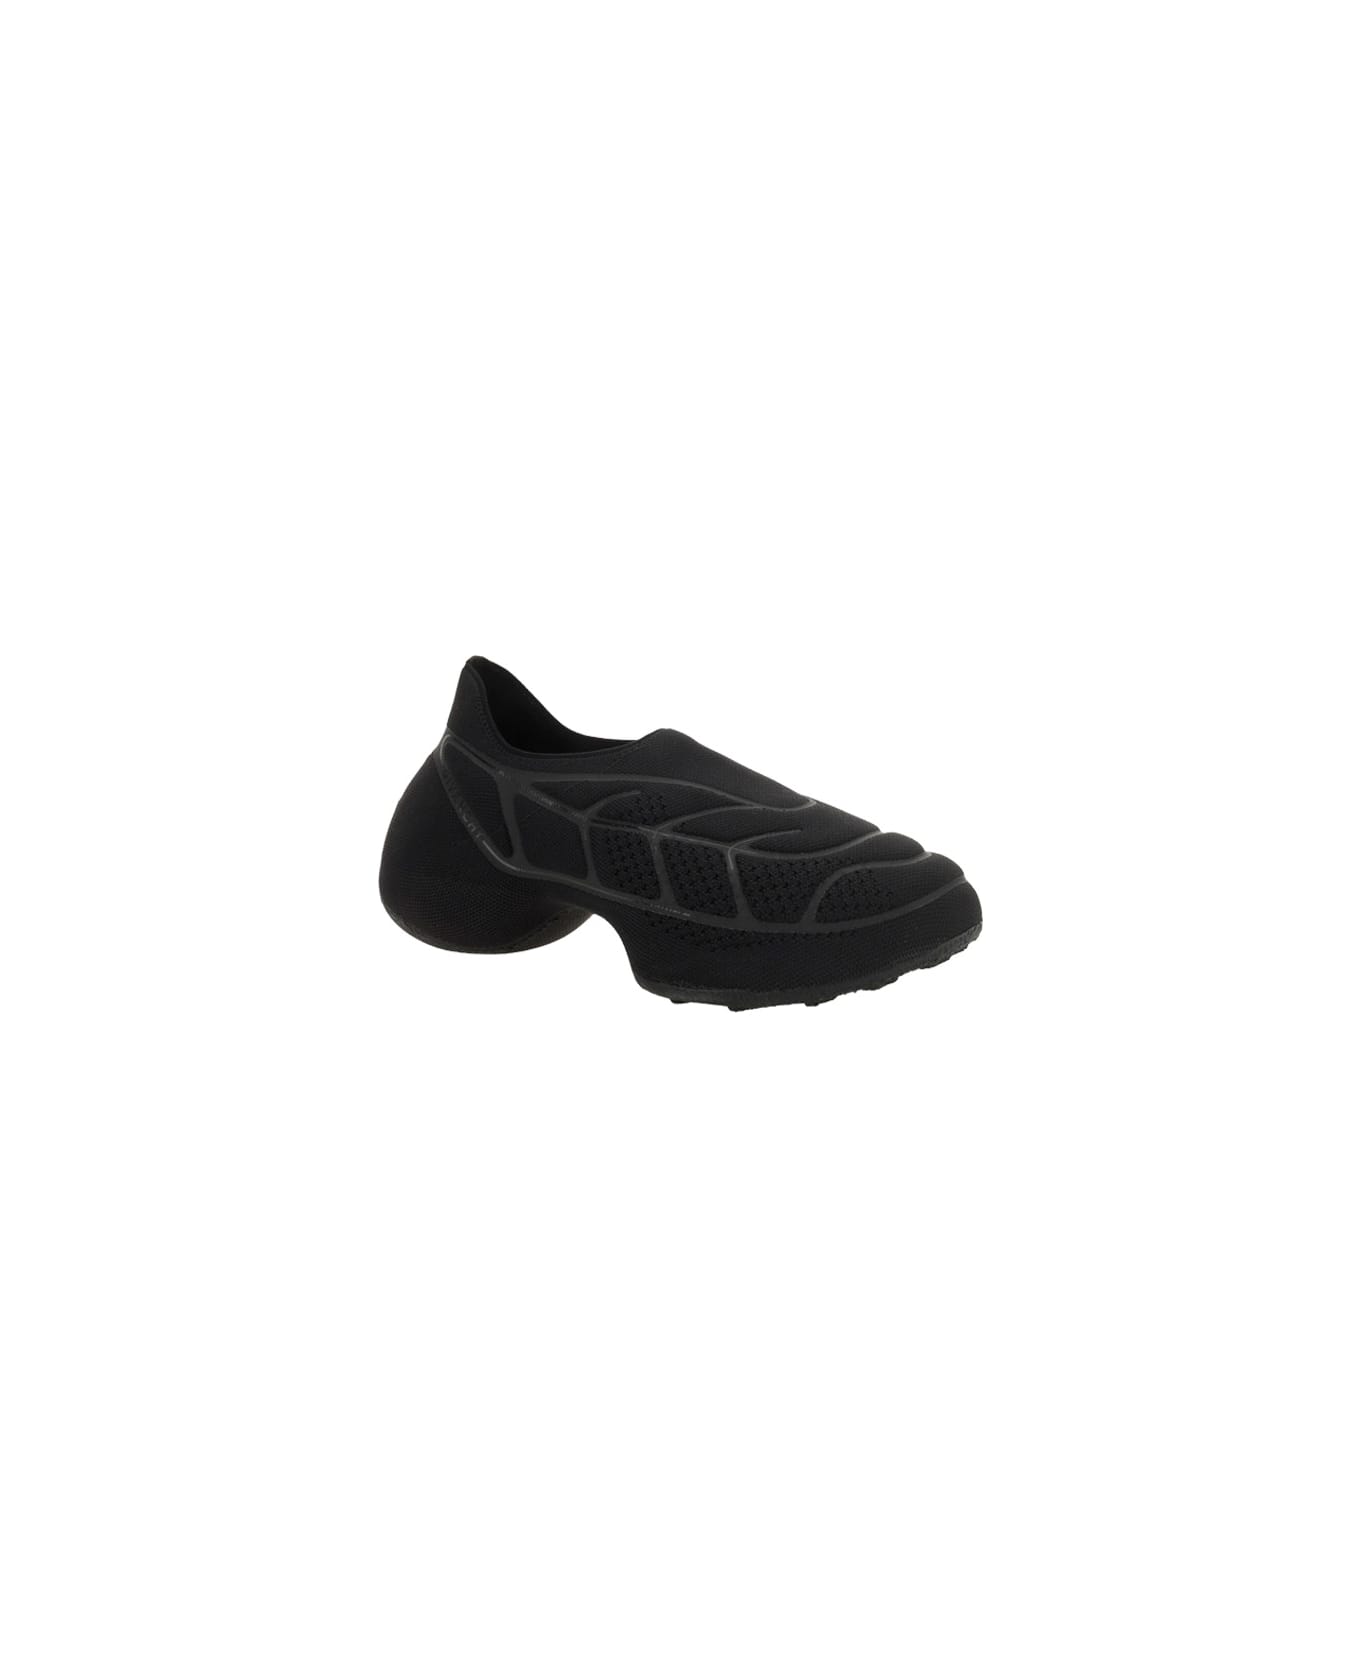 Givenchy Tk-360 Plus Sneakers - Black スニーカー